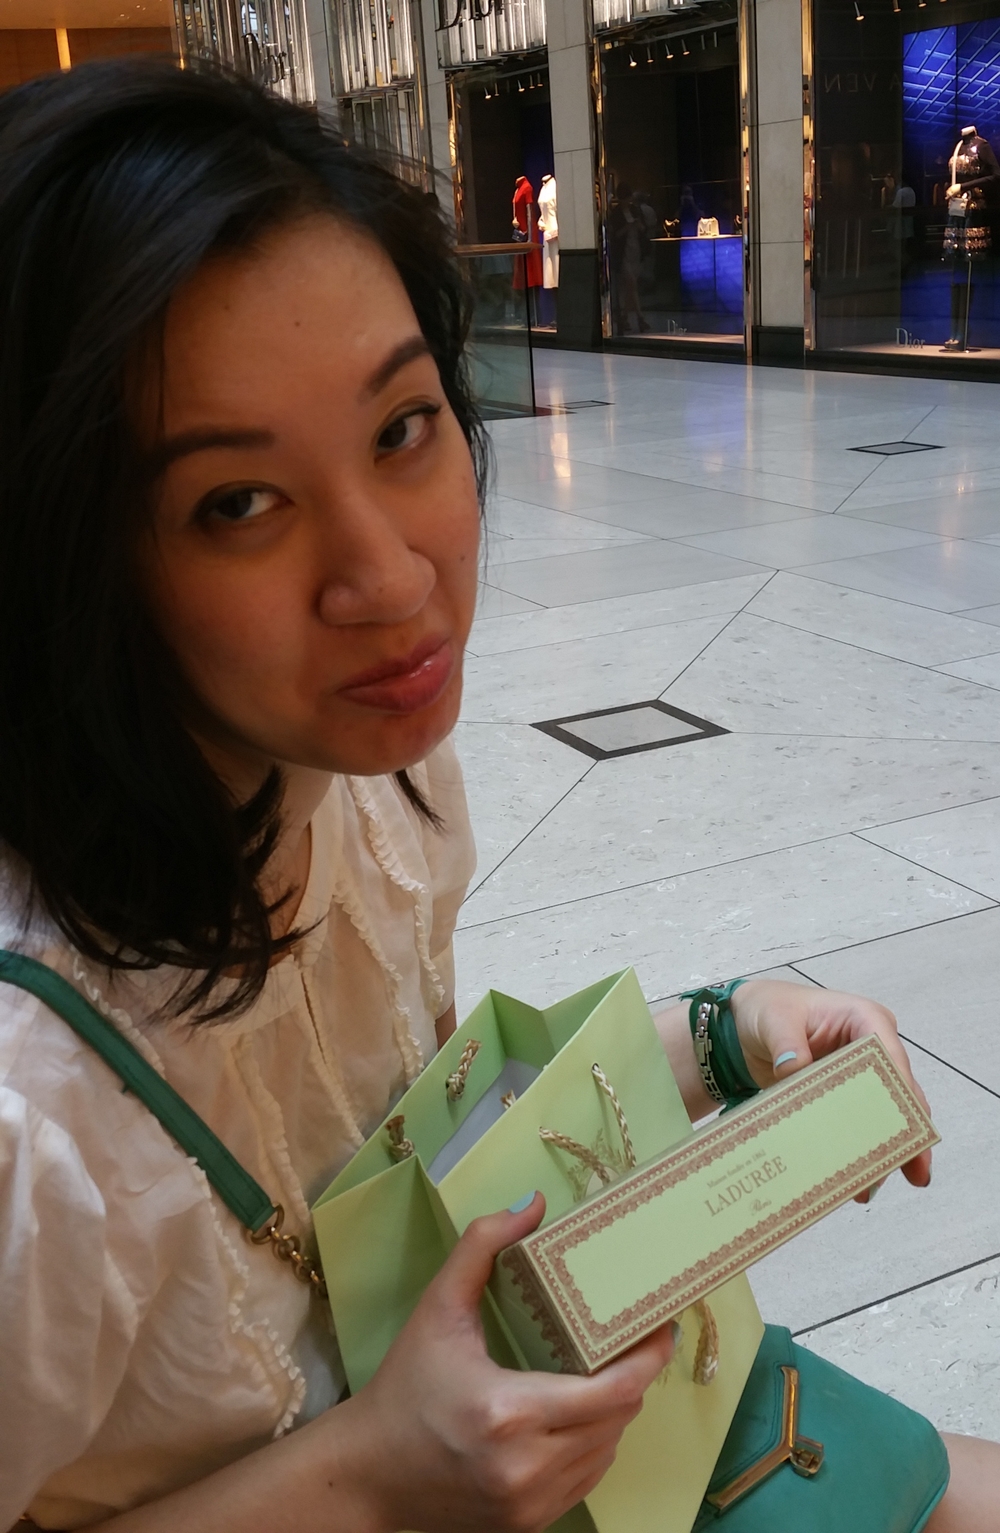  For a little backstory: the BDT is about 77 to 1 USD. The HKD is about 7.7 to 1 USD. So I kept making order-of-magnitude errors in my head. Grace is making a sad face because we accidentally spent $40 on 8 macarons. Oops. 